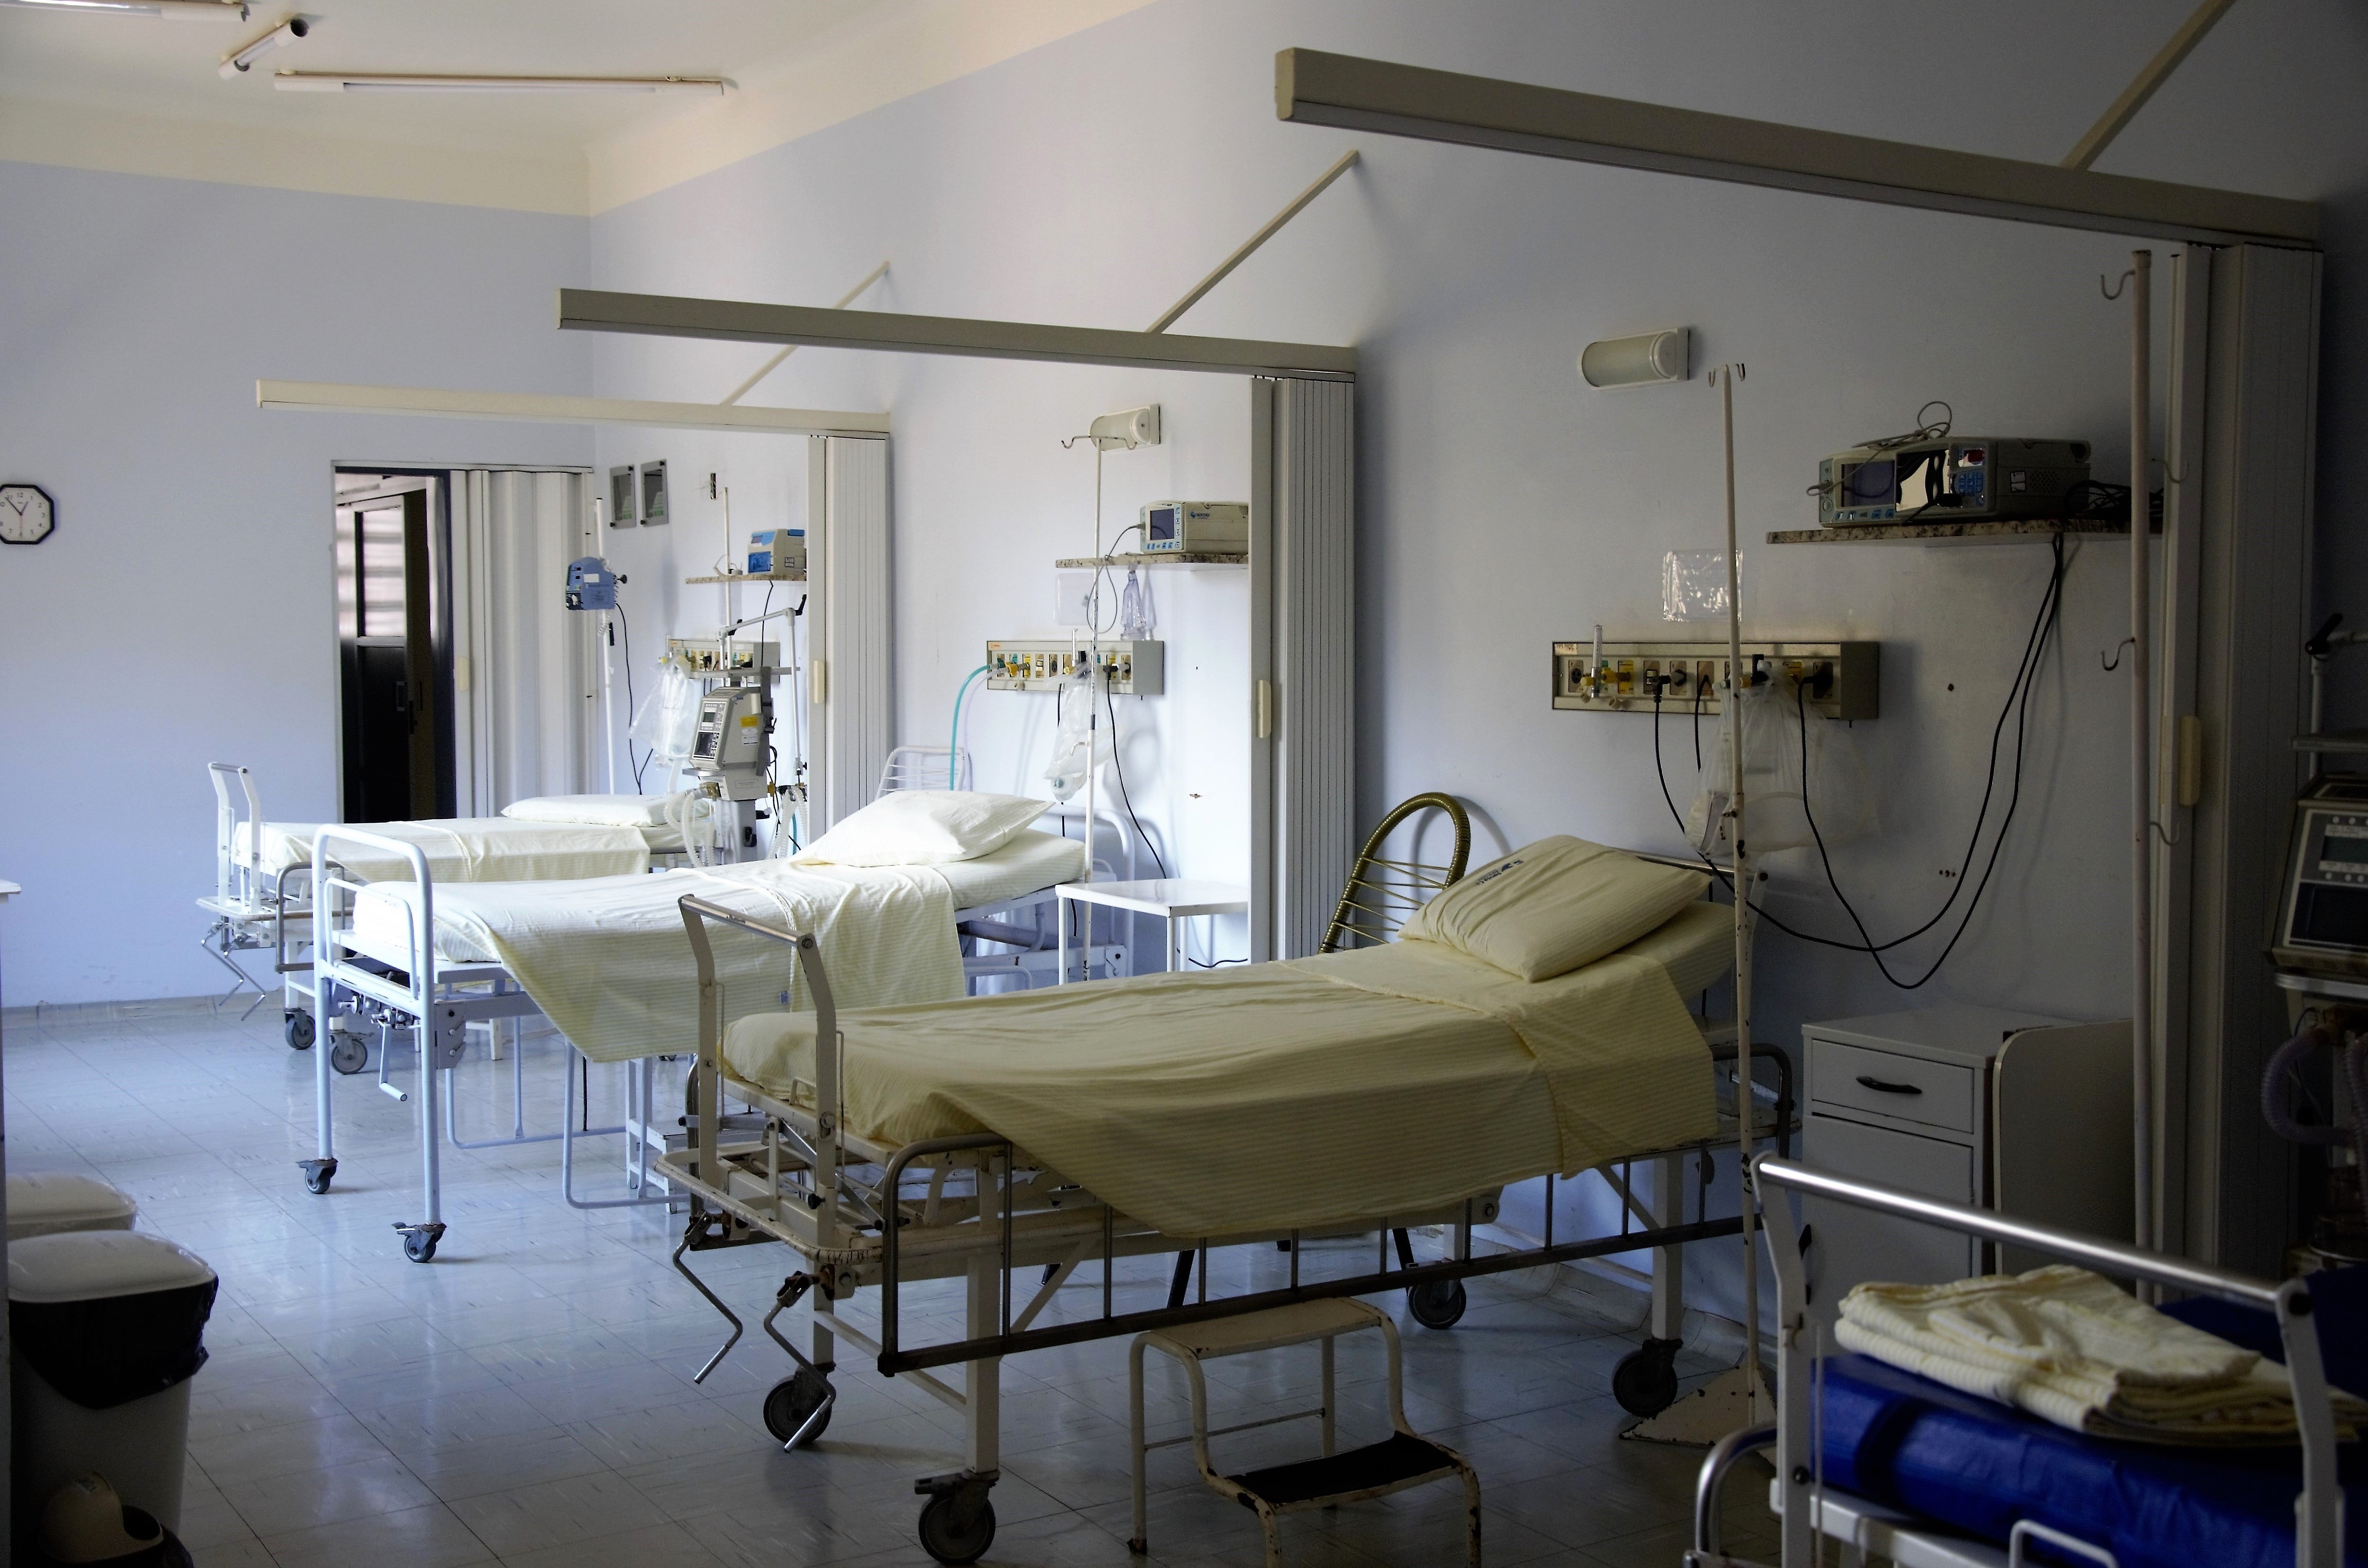 Pictured - Empty white hospital beds and equipment | Source: Pexels  